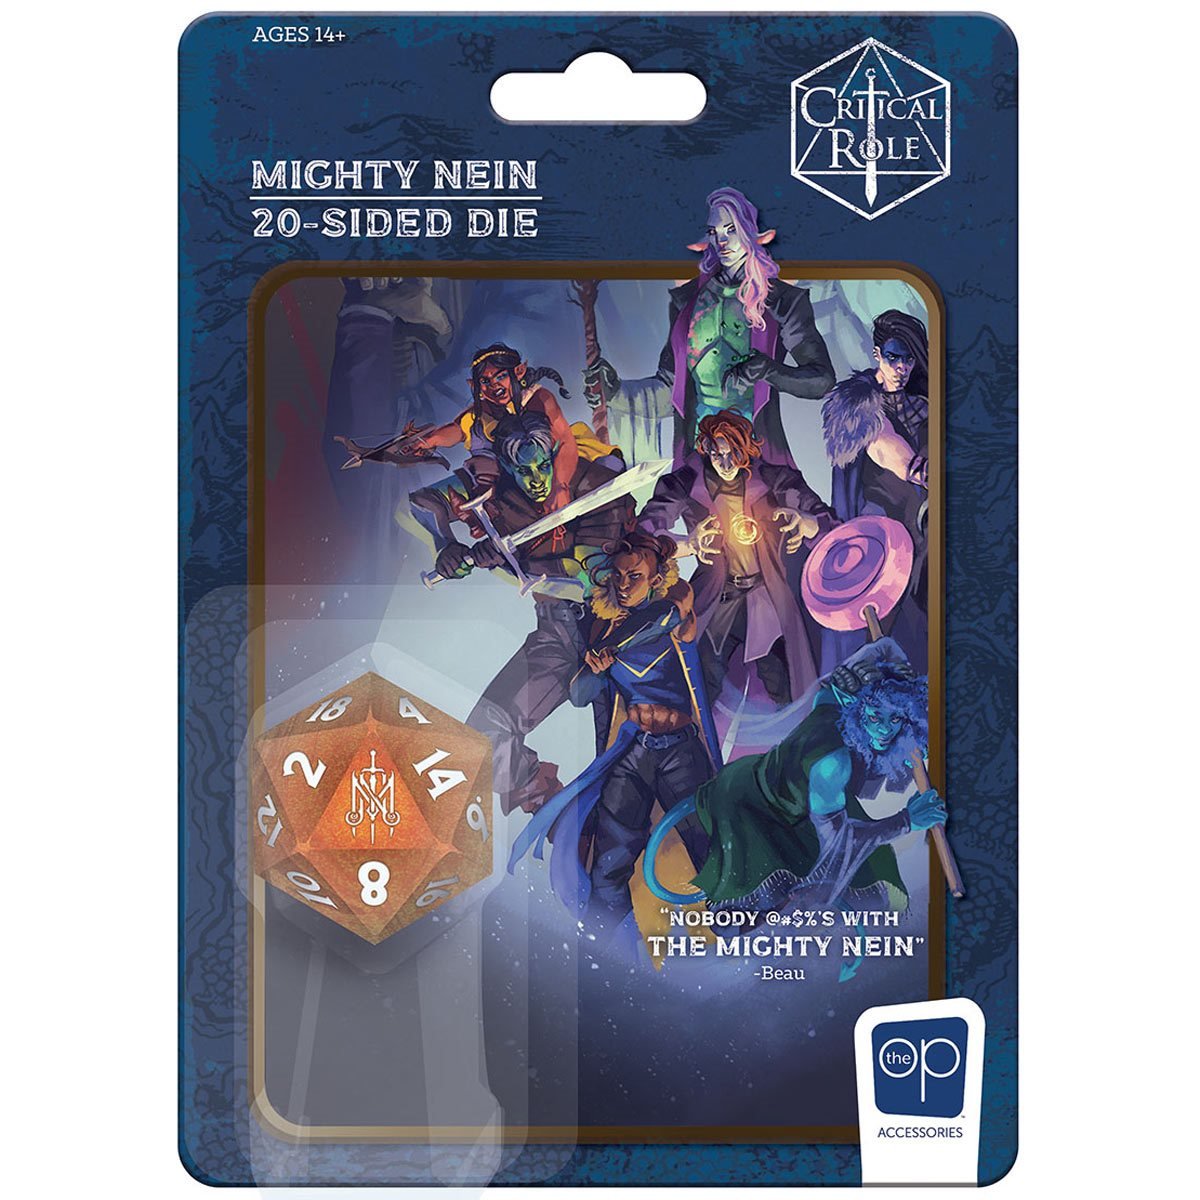 Critical Role Mighty Nein: d20 36mm 20-Sided Die